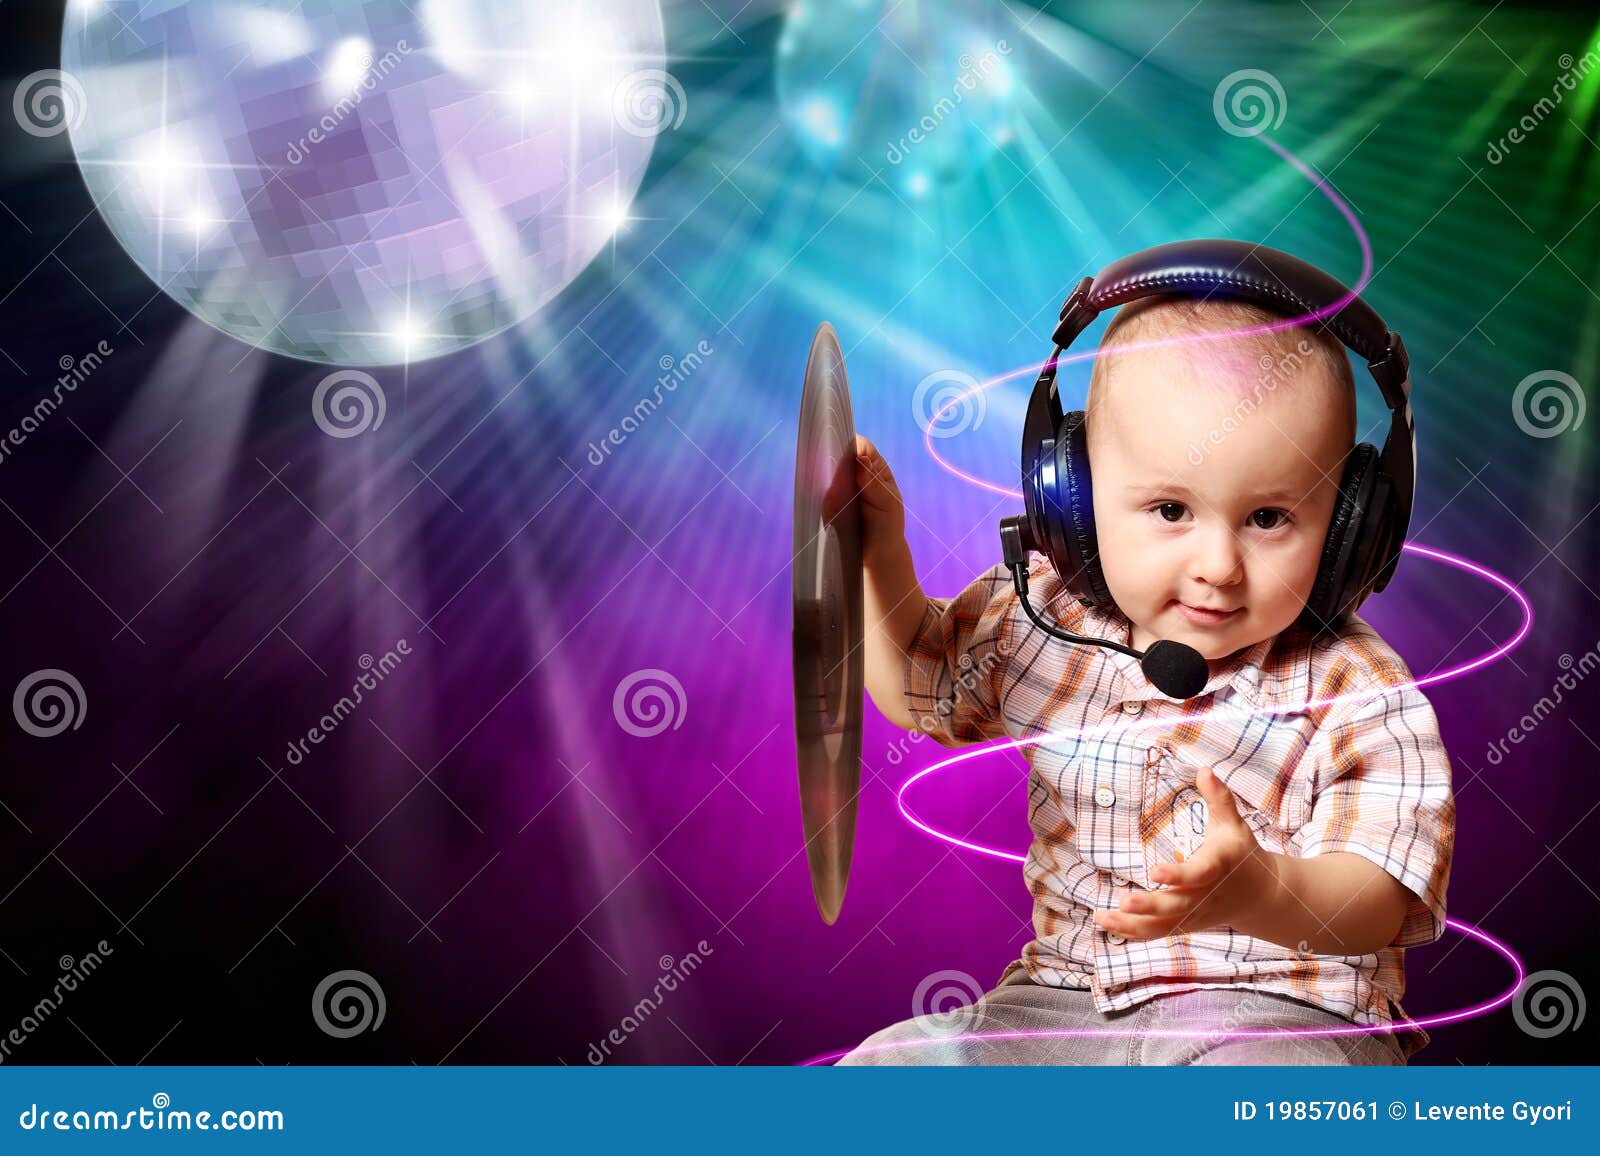 156 Baby Dj Stock Photos - Free & Royalty-Free Stock Photos from Dreamstime